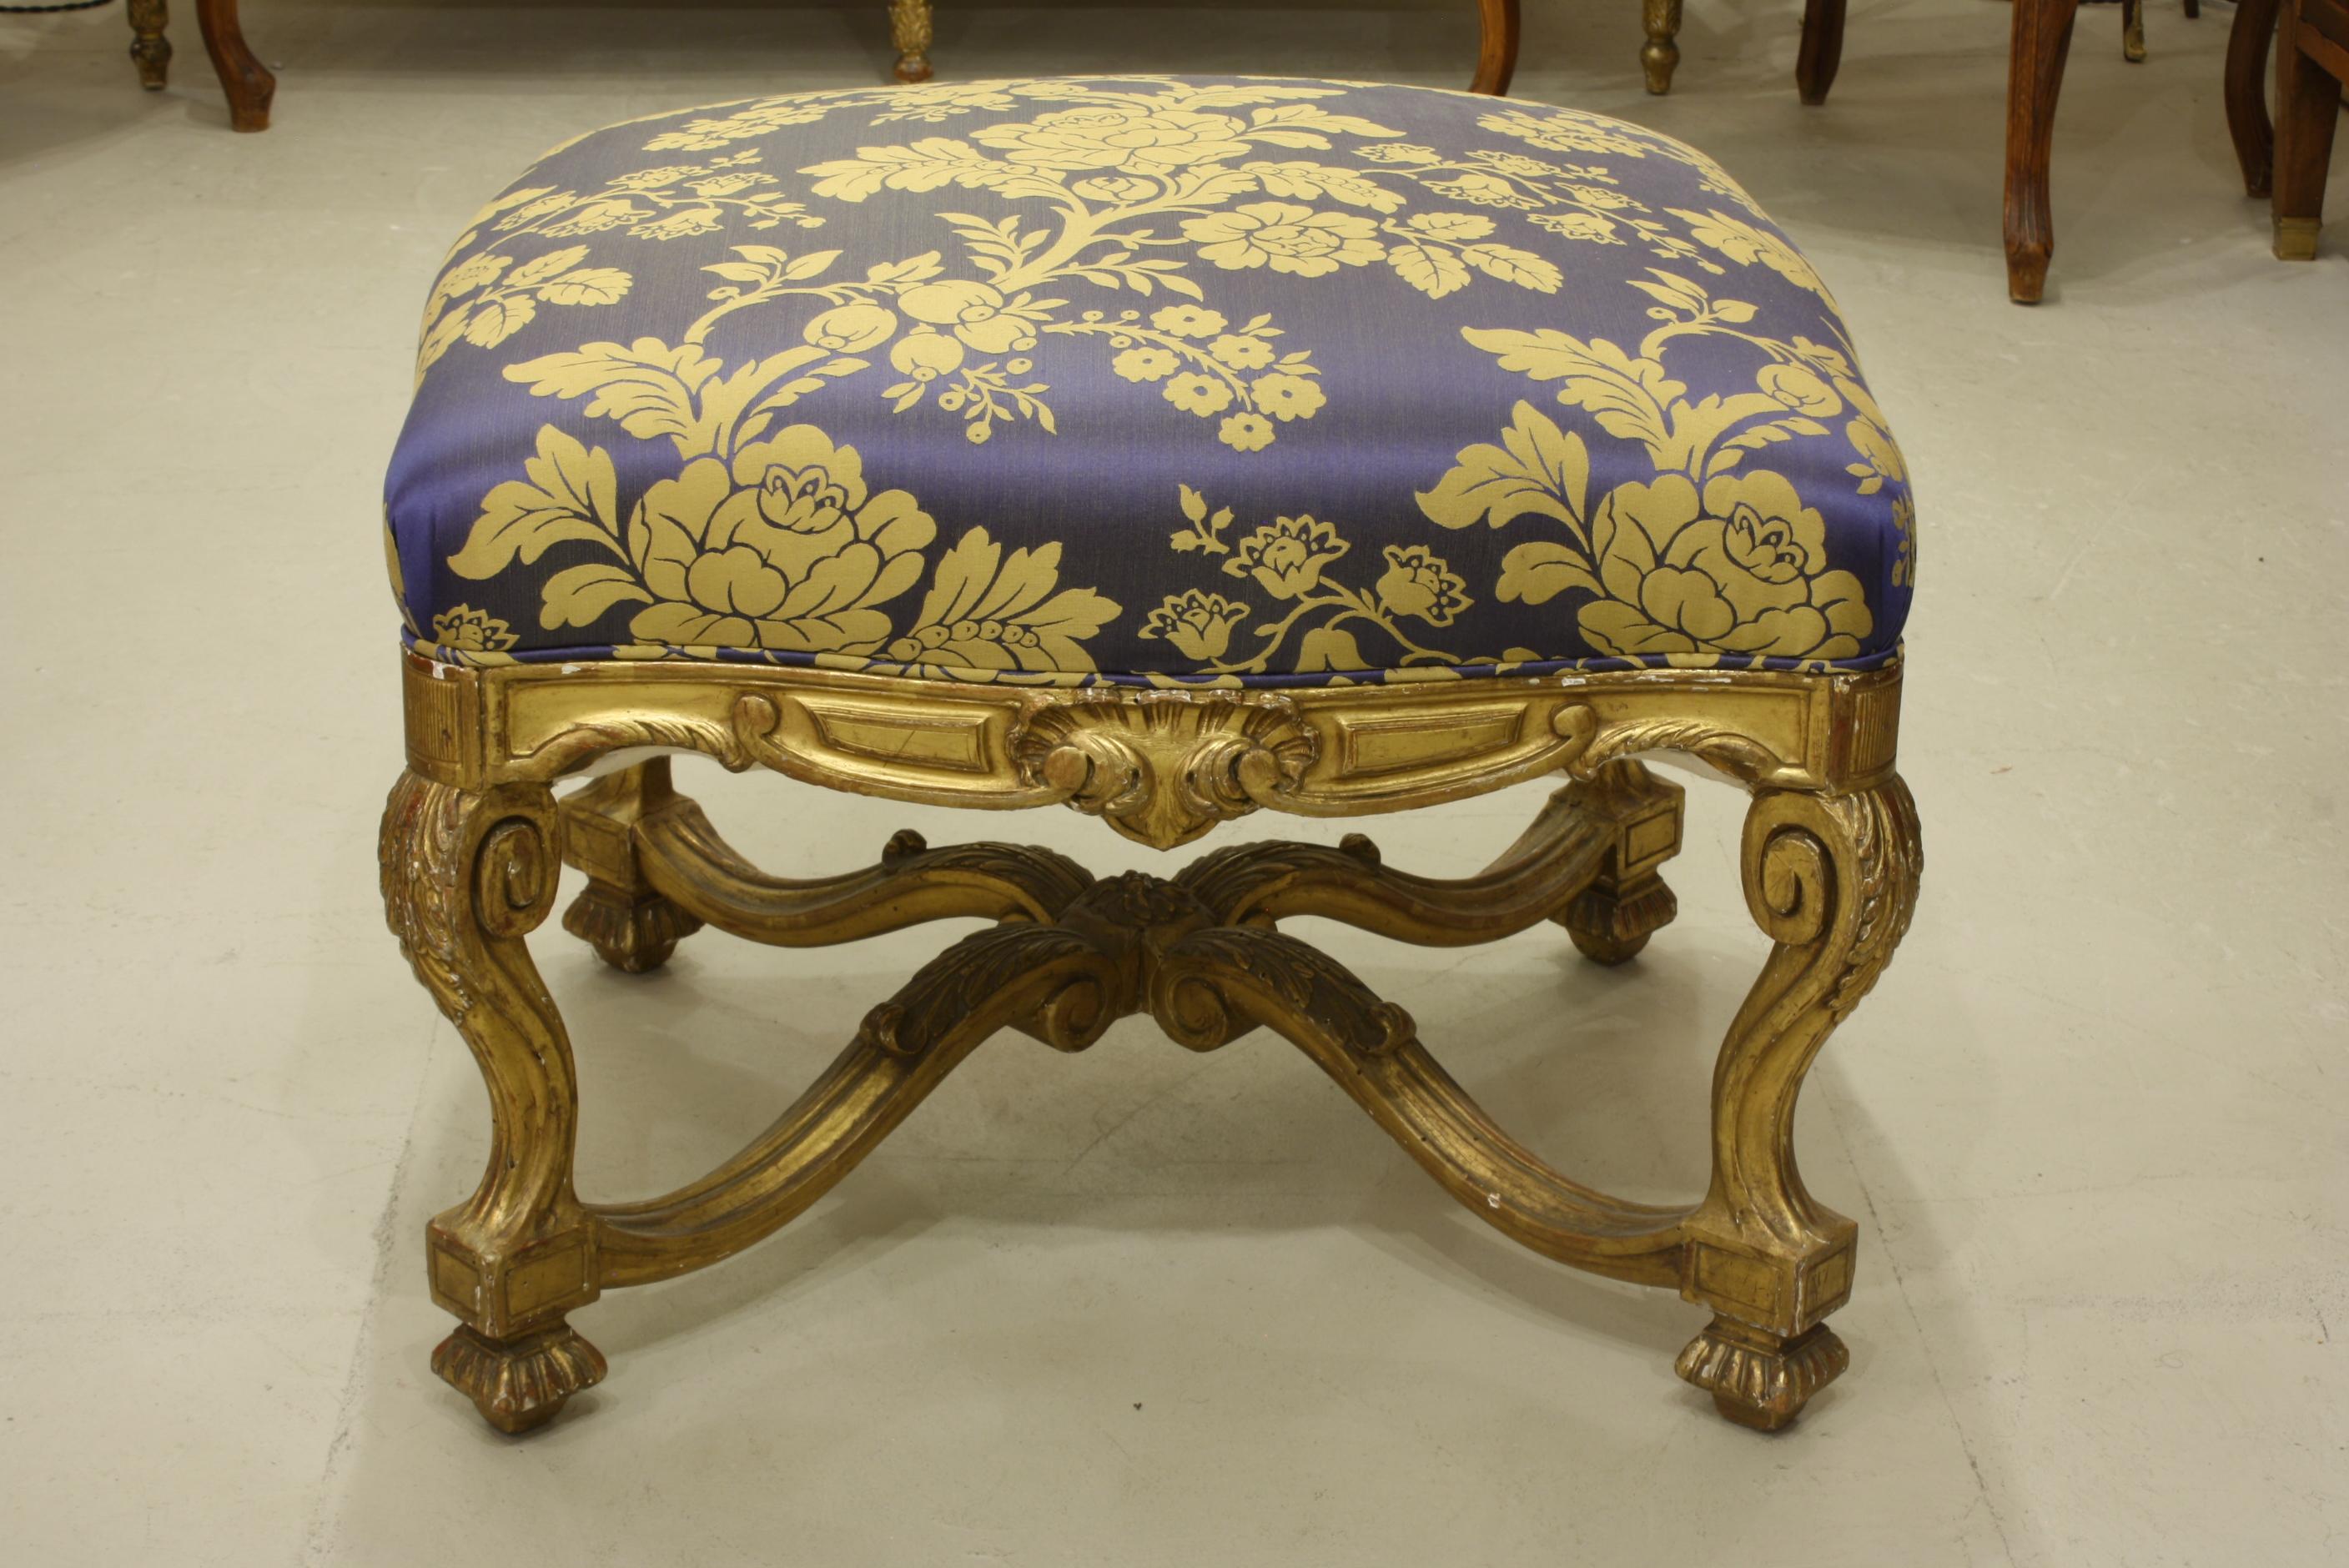 French Regence style carved giltwood stool, tabouret or ottoman with stretcher. The tabouret has been reupholstered in silk damask fabric.